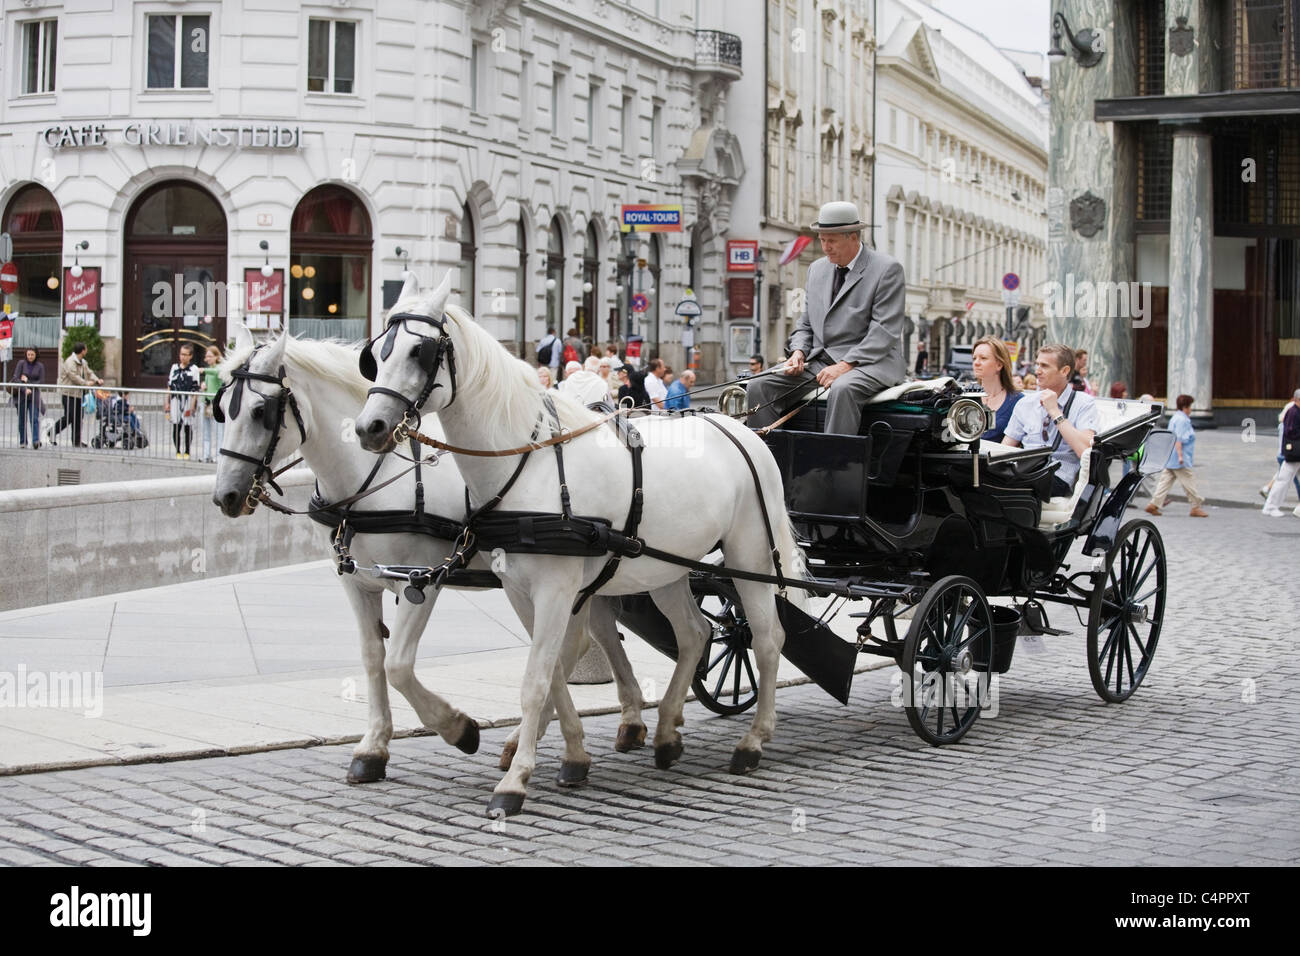 Horse and carriage, Cafe Griensteidl and Loos House in background, Michaelerplatz, Vienna, Austria Stock Photo